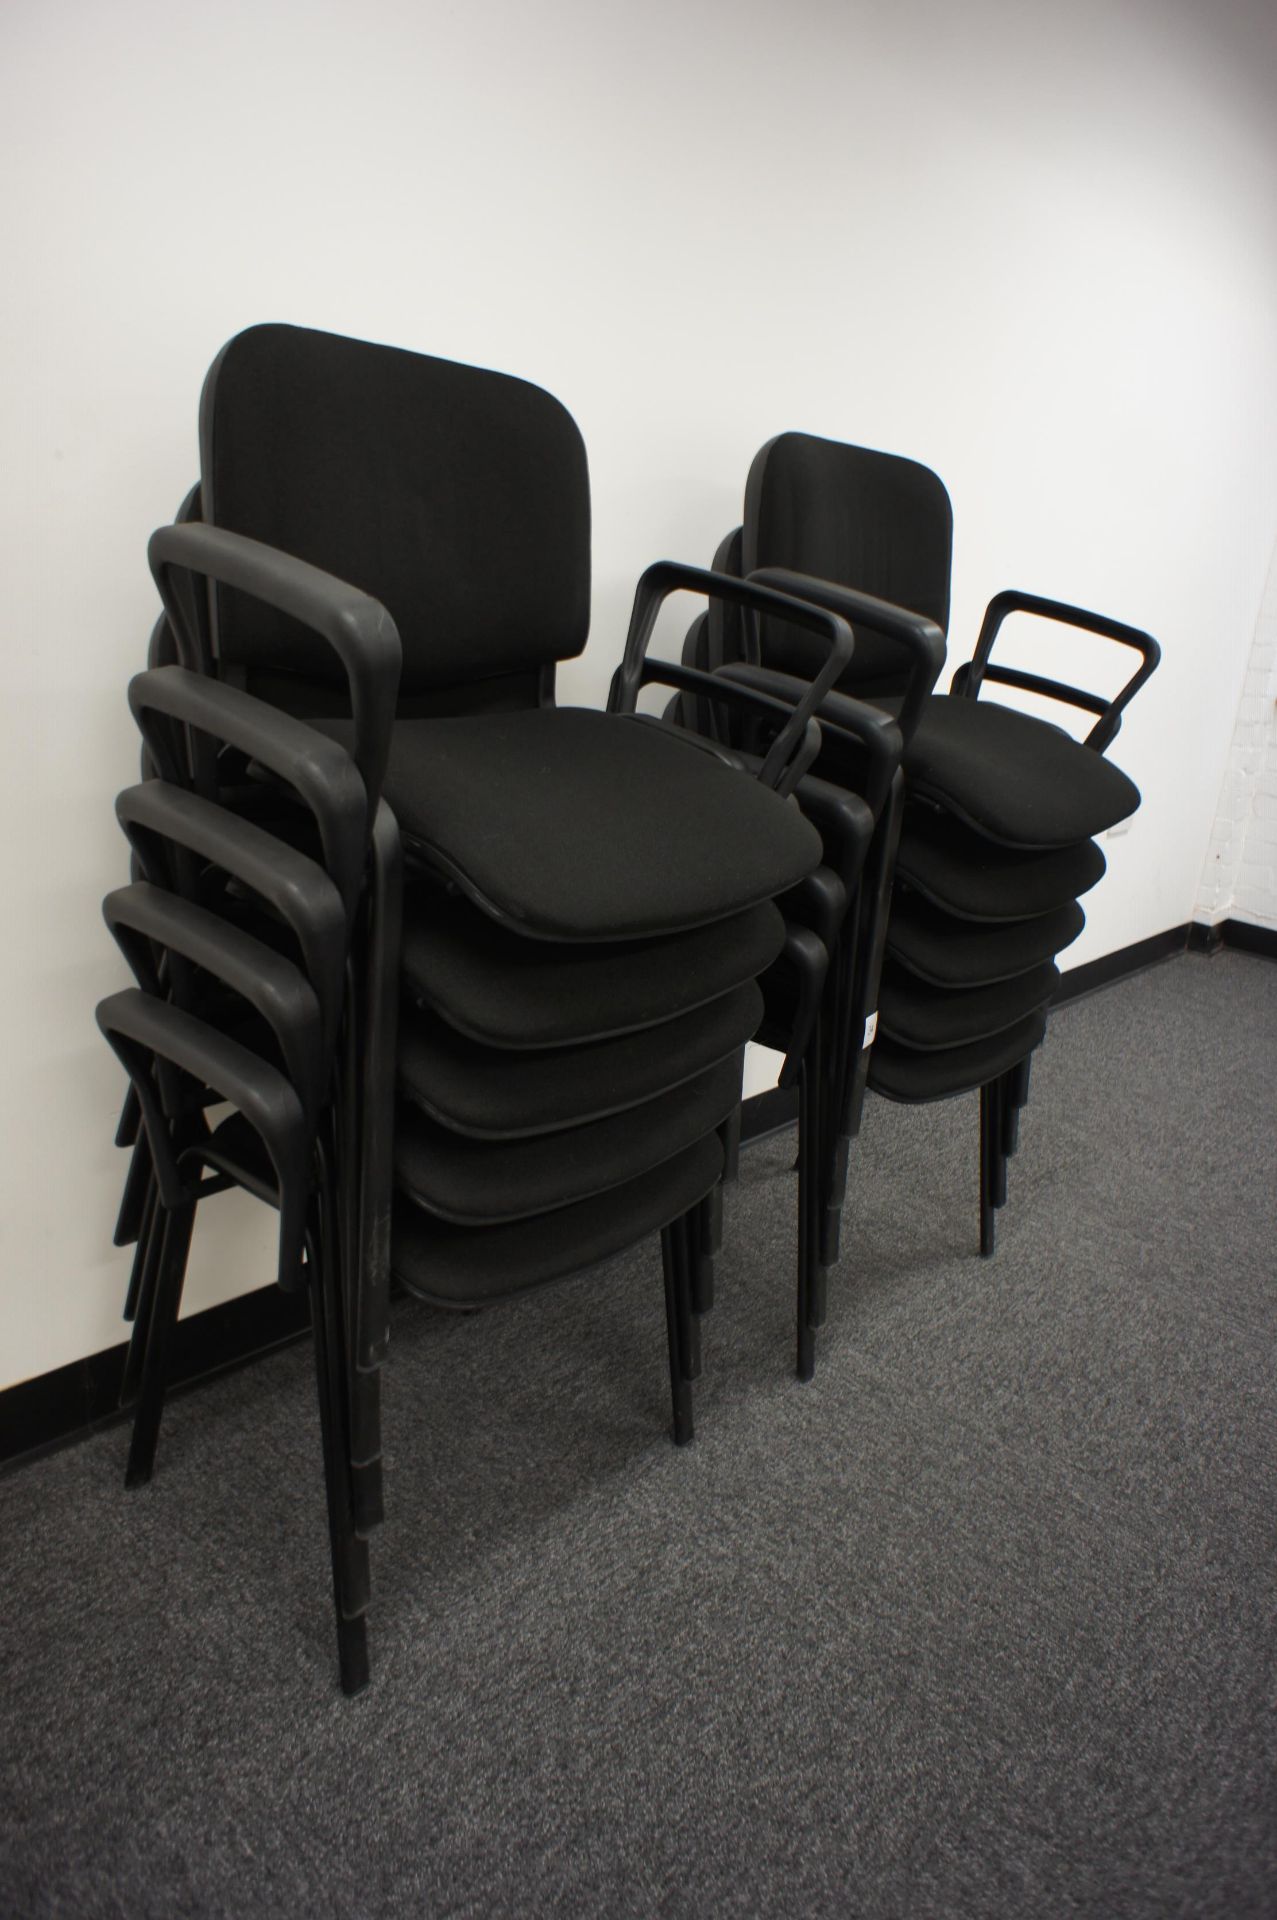 10 Upholstered Meeting Chairs - Image 2 of 3